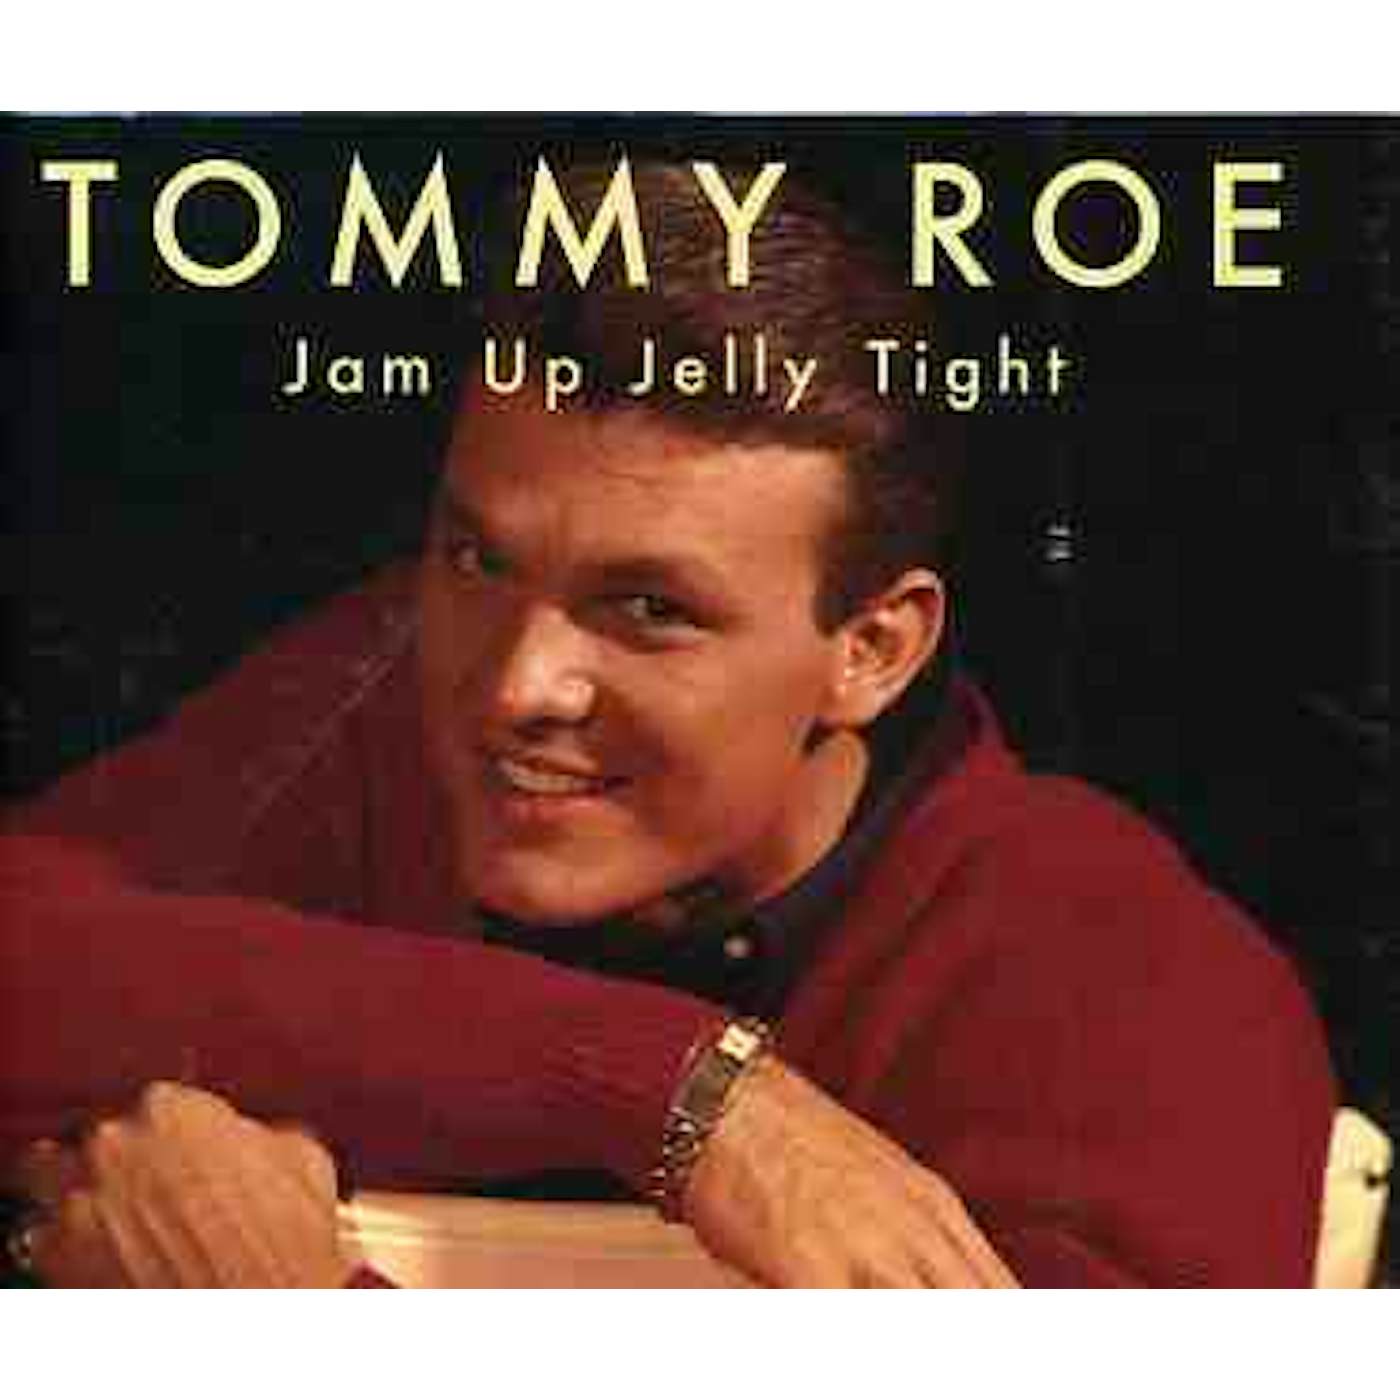 Tommy Roe JAM UP JELLY TIGHT CD